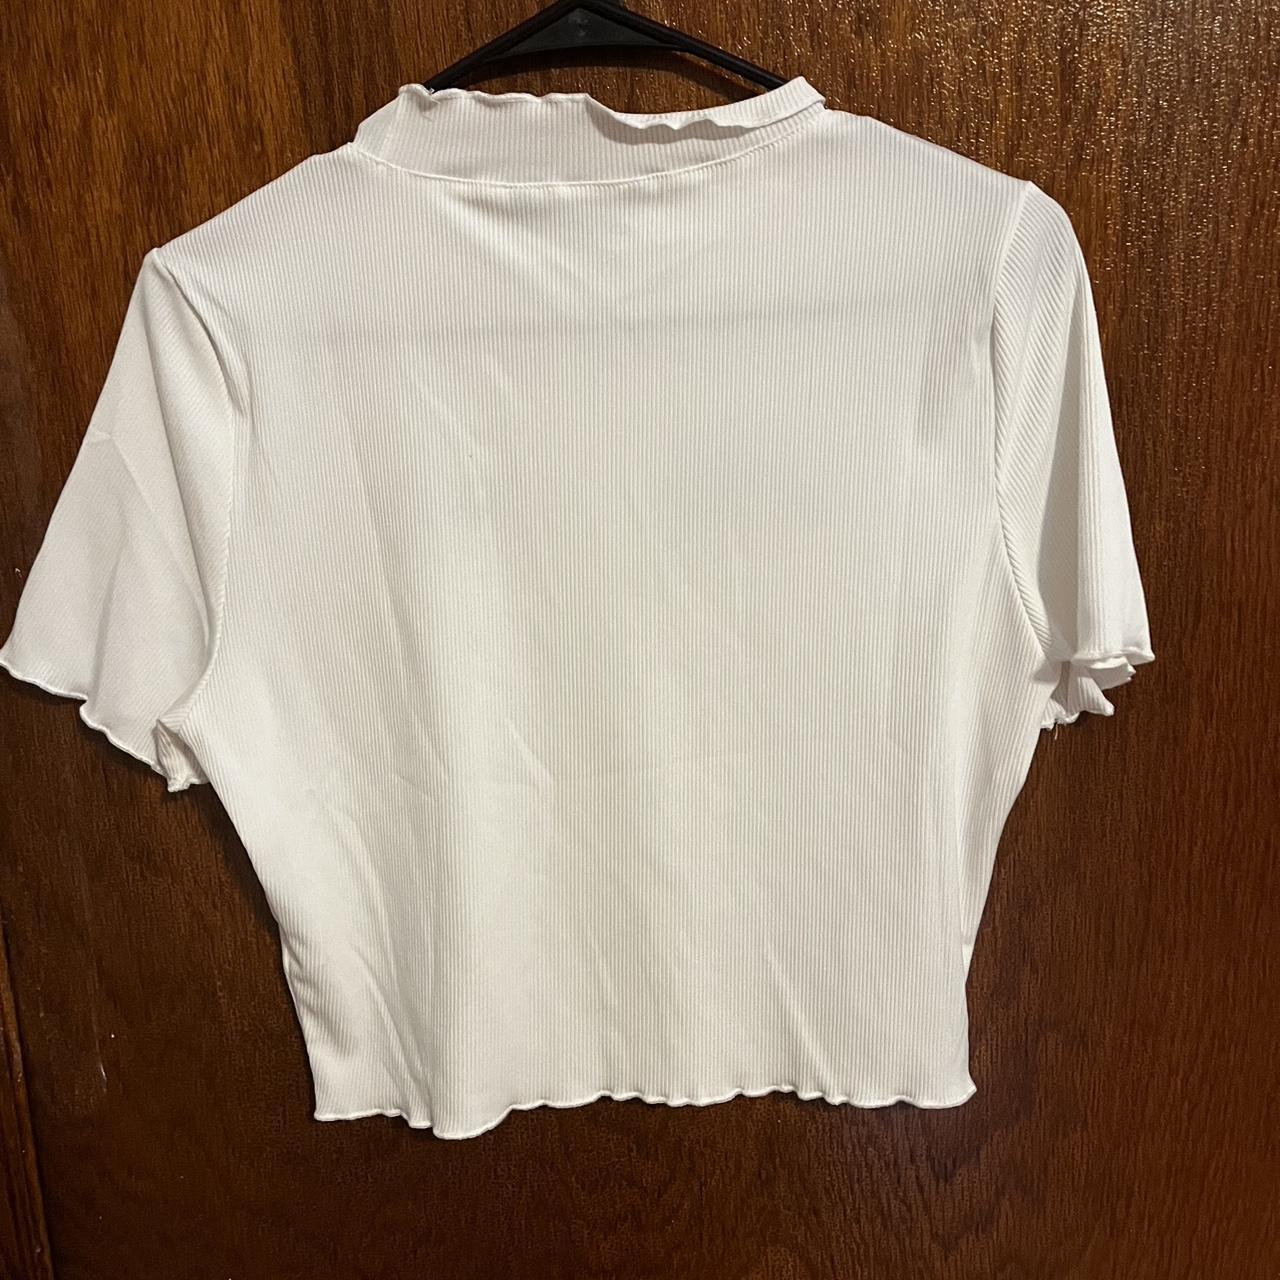 Crying anime eyes crop top, size XL. Only worn once.